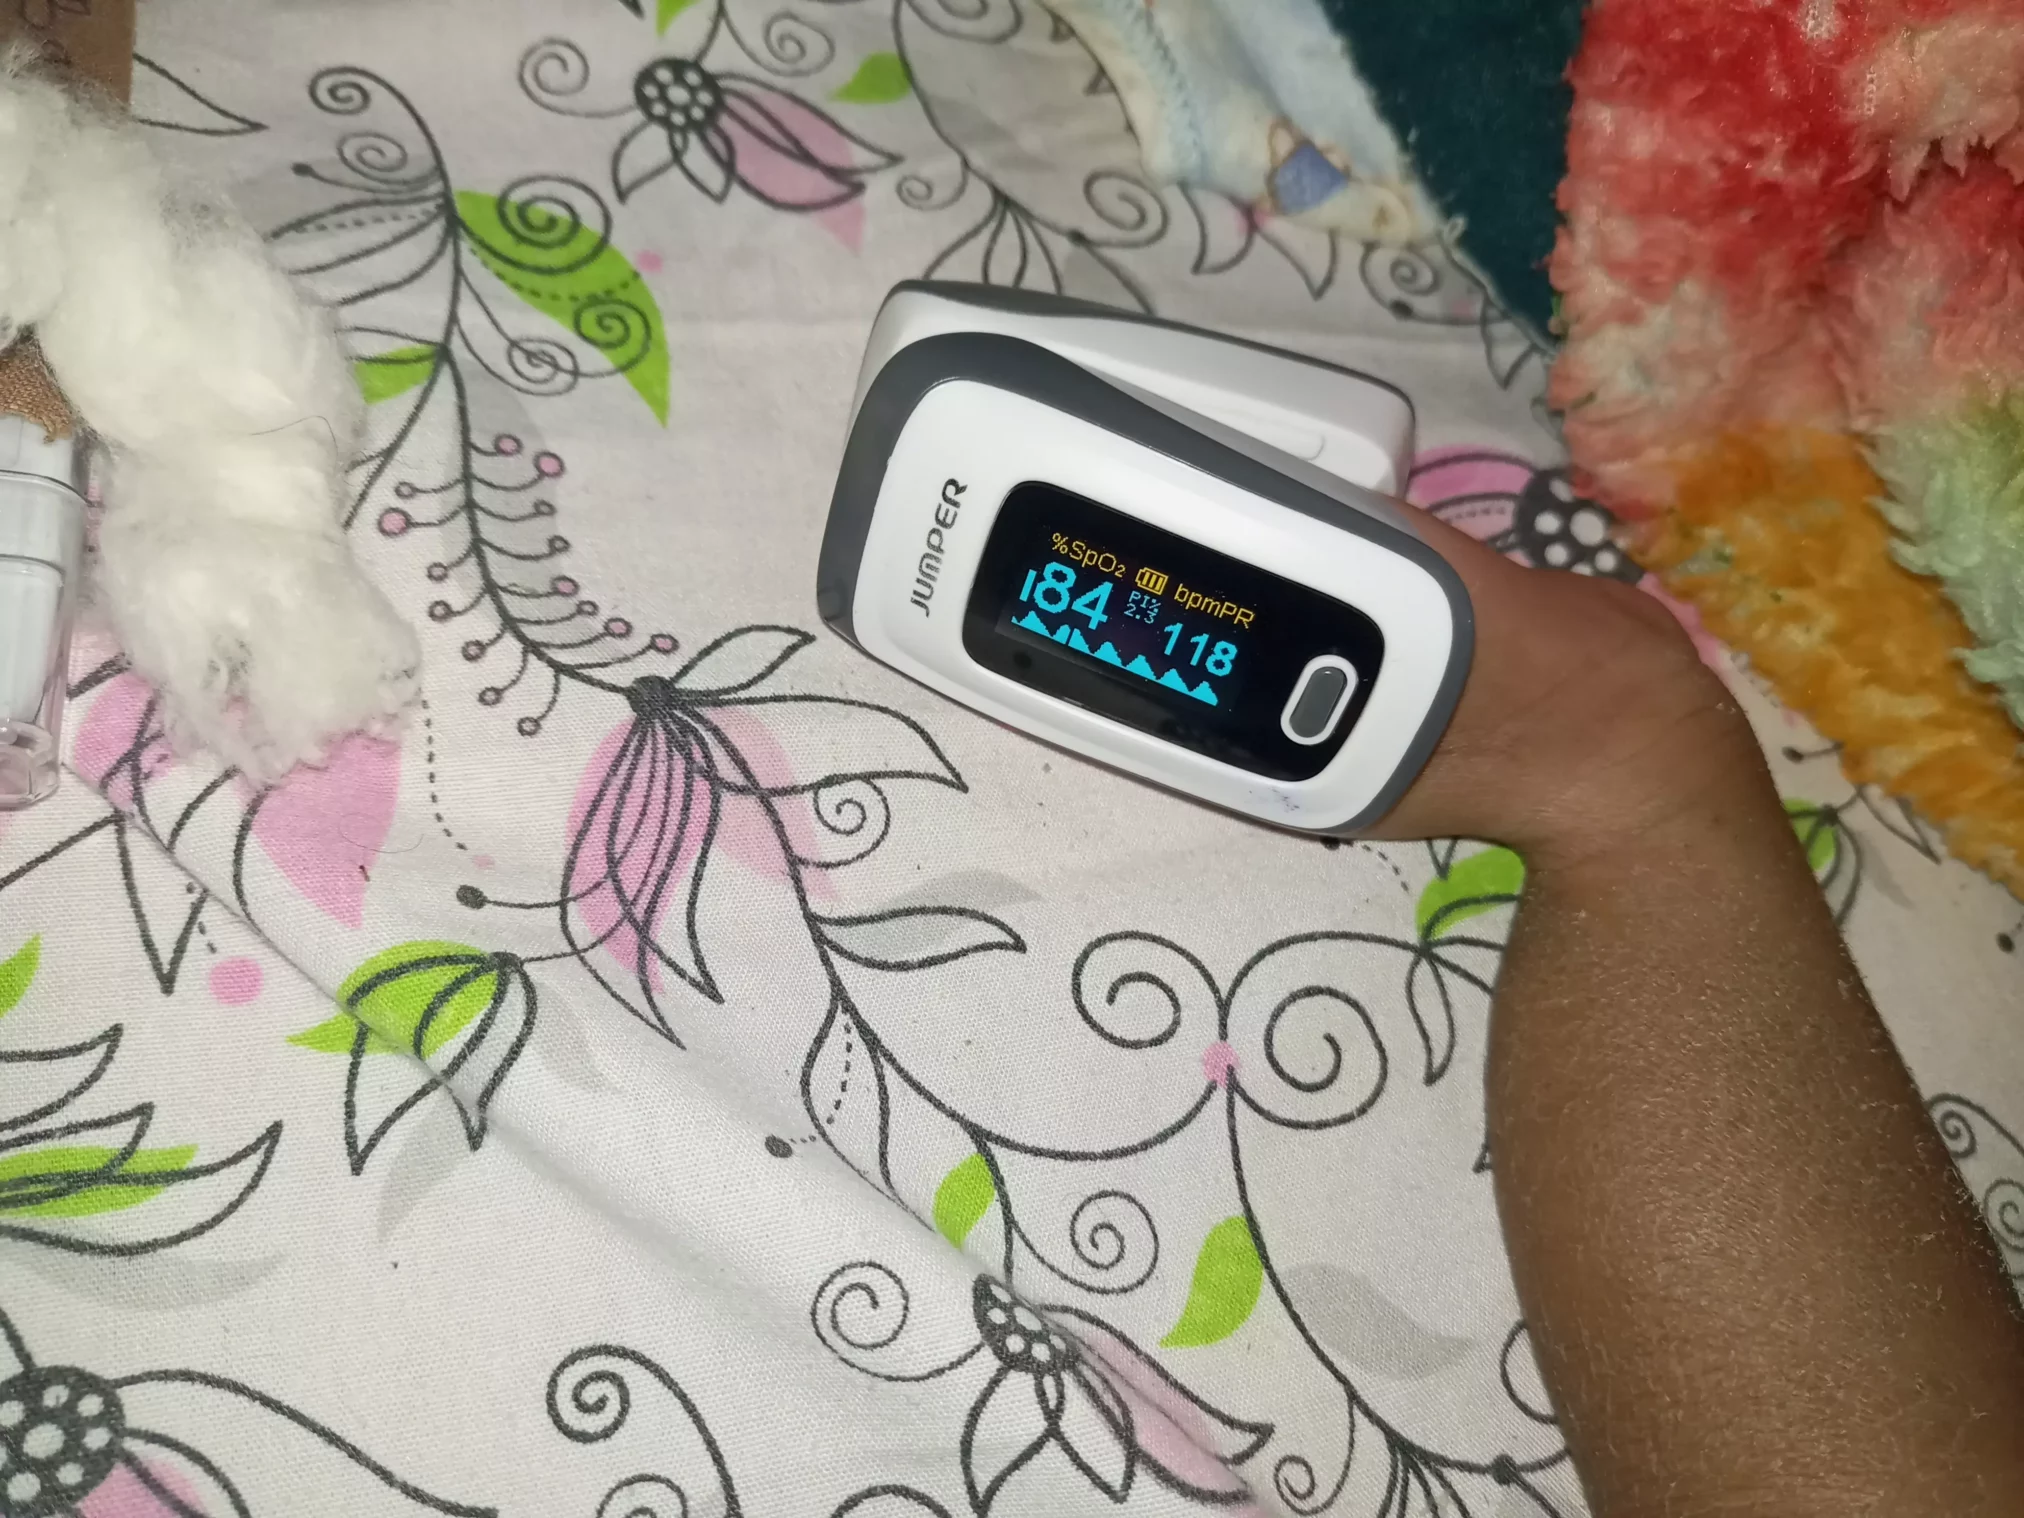 How to put a pulse oximeter on a baby's foot